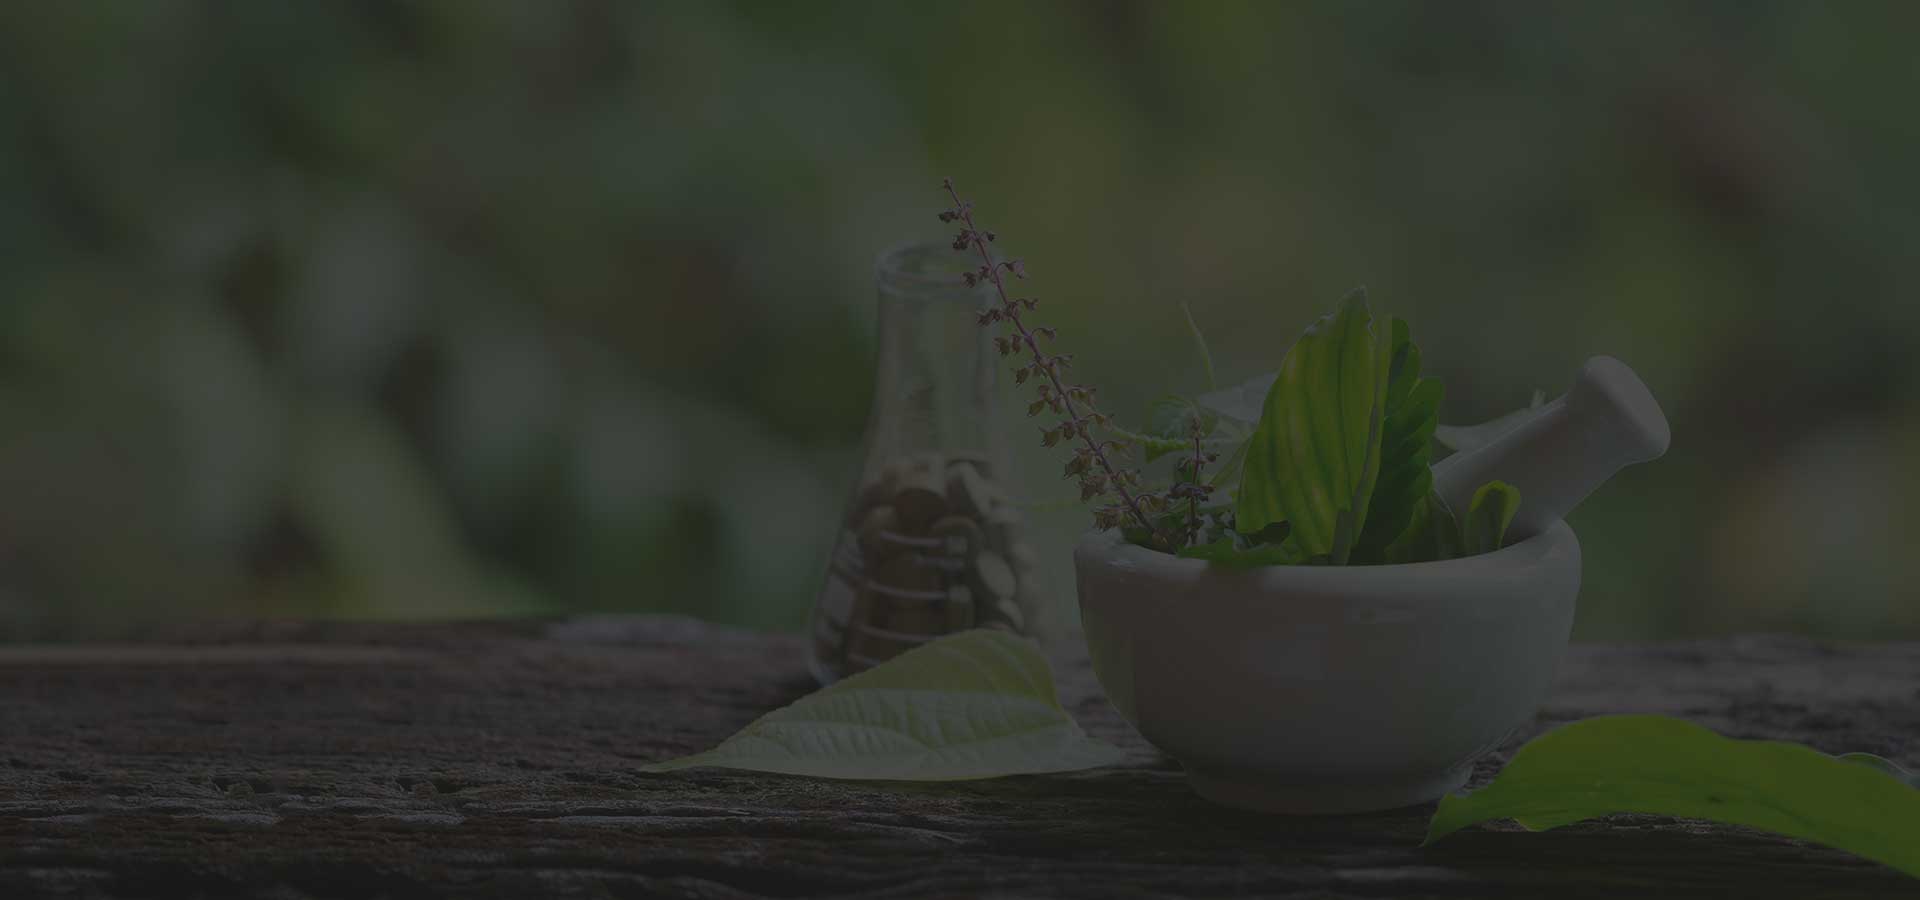 Virginias Apothecare Wellness Consultations and Herbal Medicine in Port Macquarie, NSW